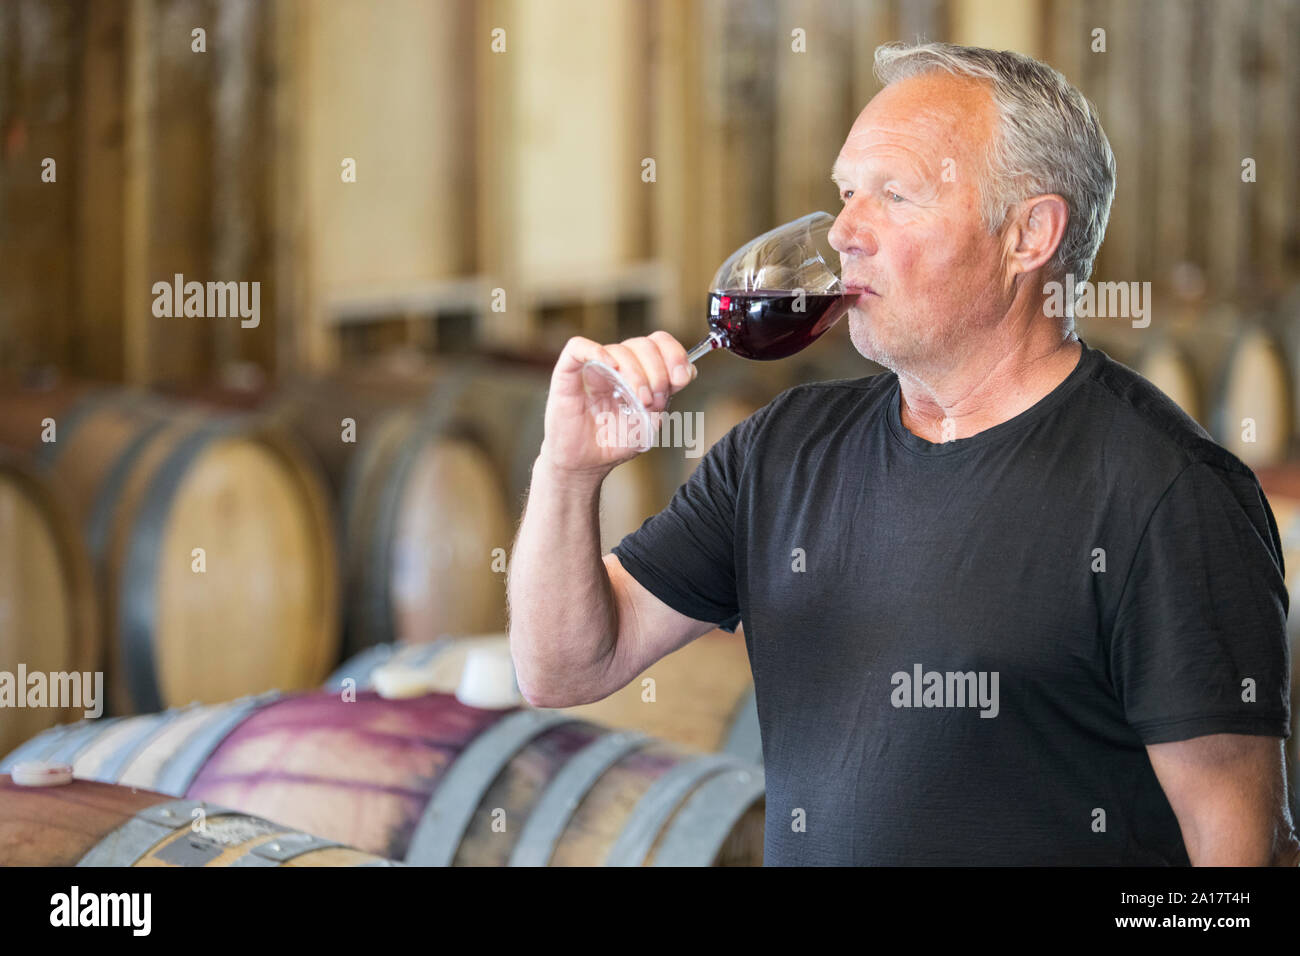 Man Wine tasting in storehouse at a local vineyard. Stock Photo